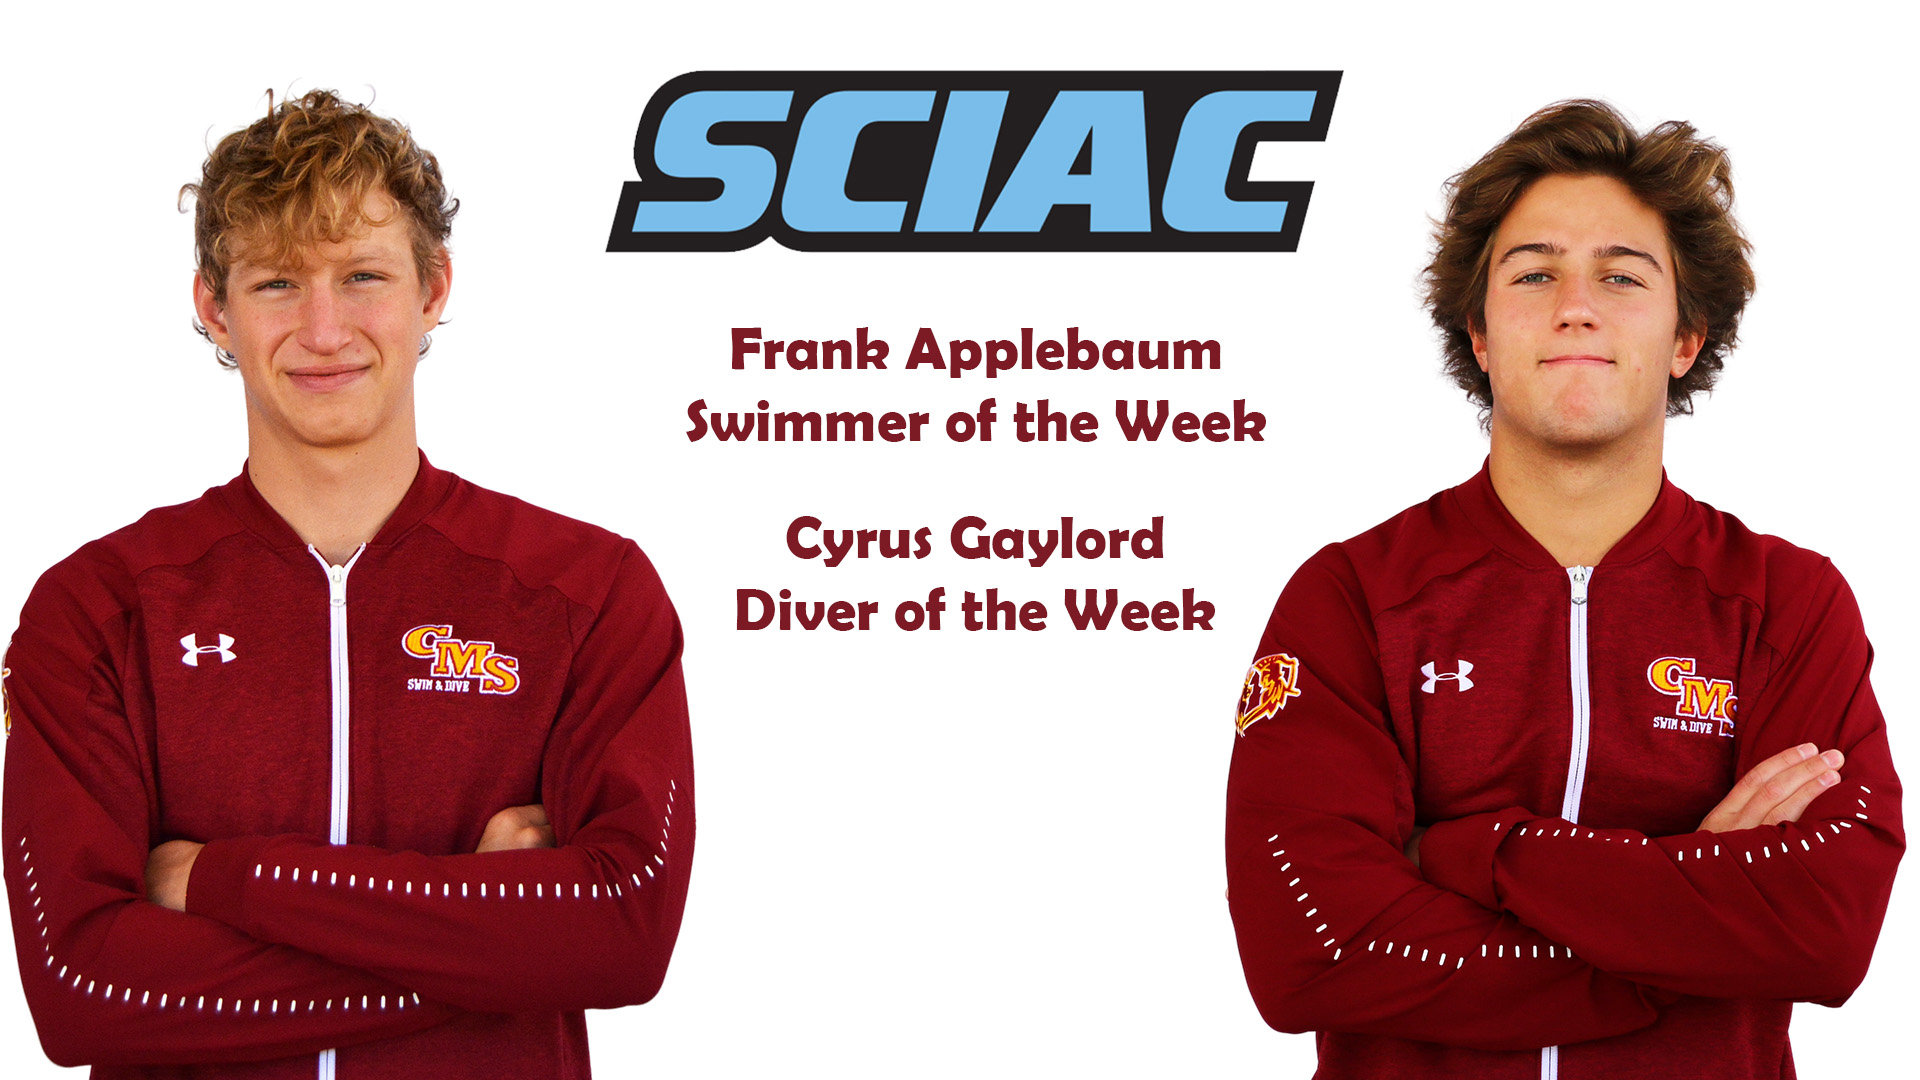 Posed shots of Frank Applebaum and Cyrus Gaylord with the SCIAC logo